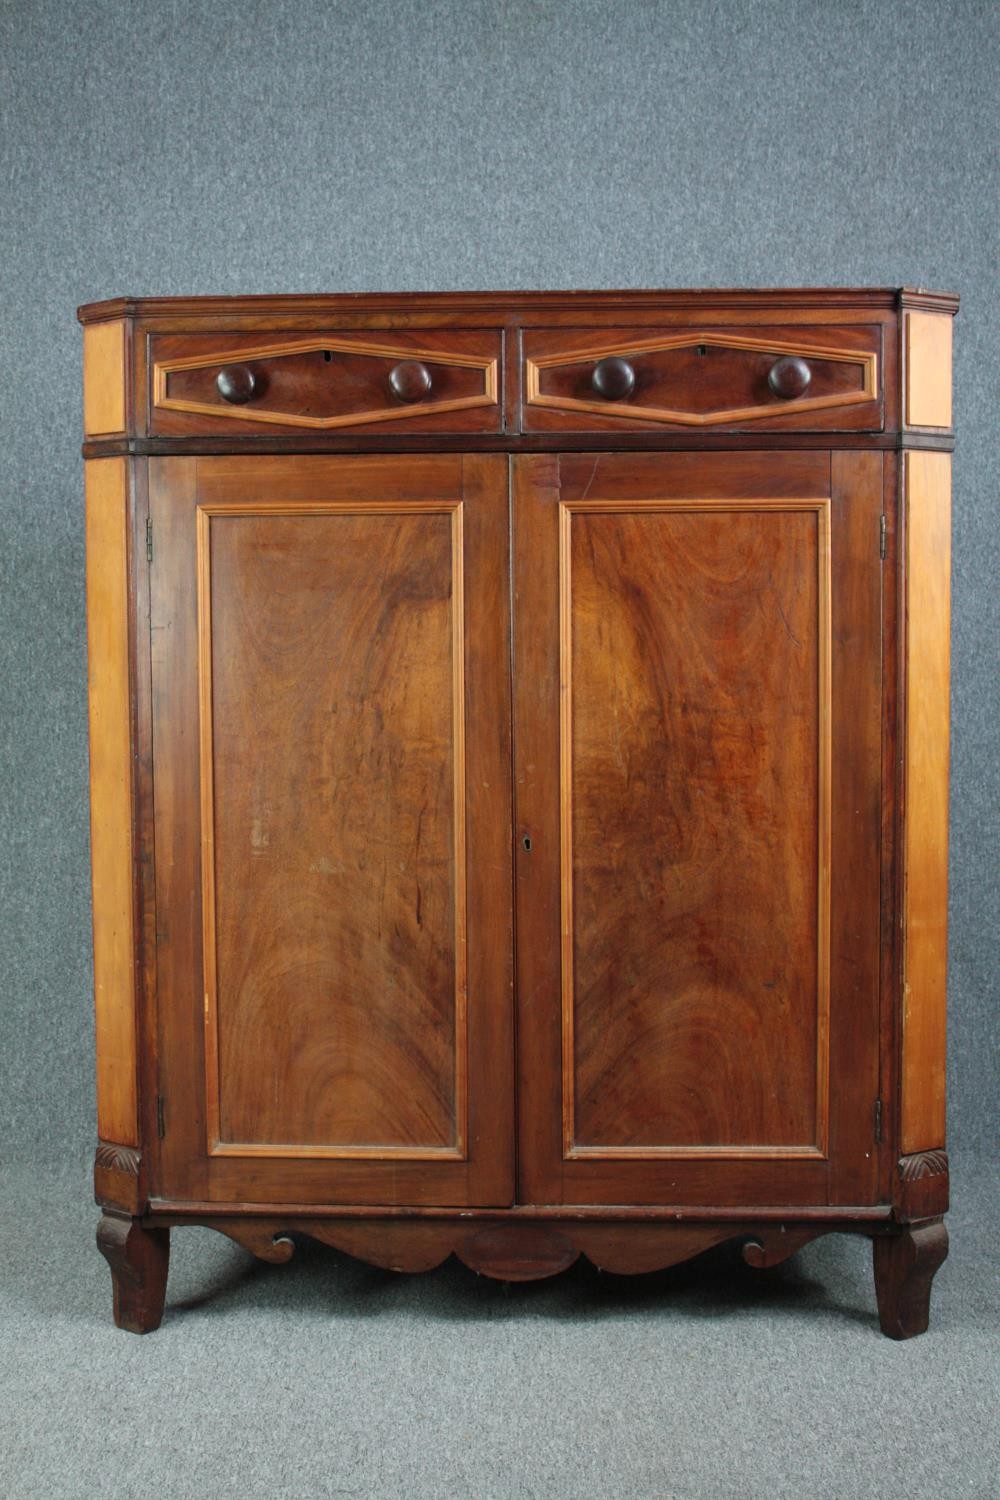 Cabinet, 19th century Continental flame mahogany. H.148 W.124 D.54cm. (Rear leg damaged as shown).